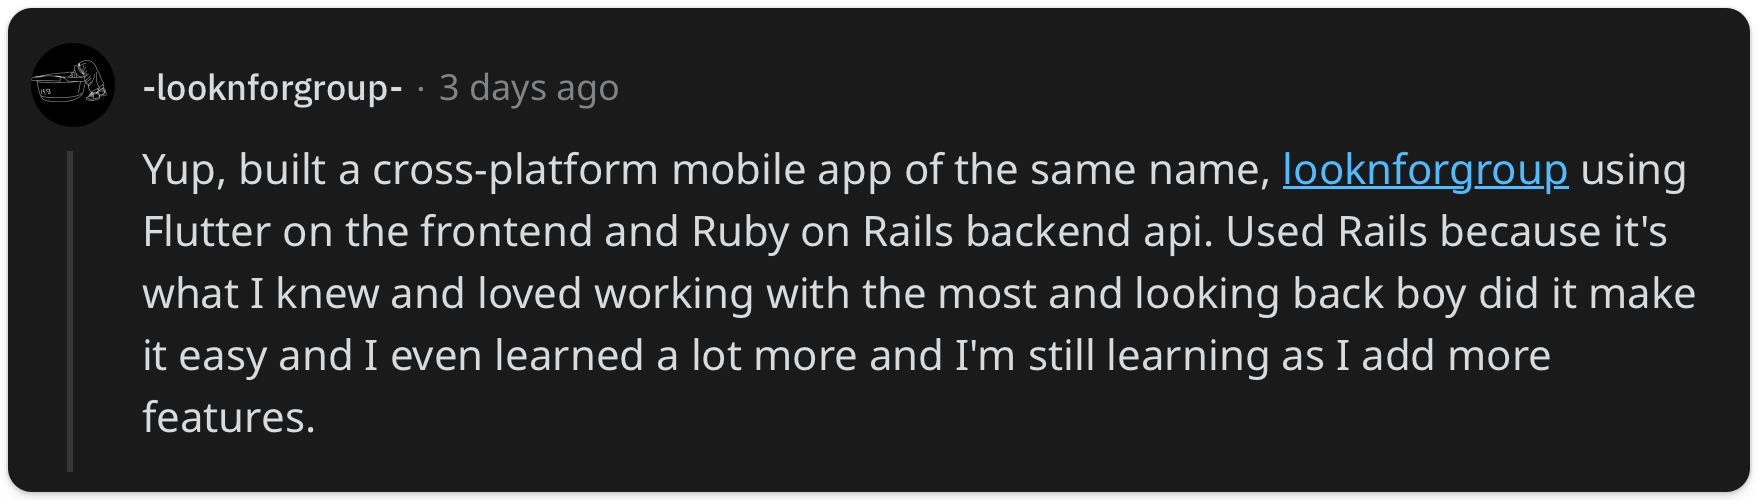 "Yup, built a cross-platform mobile app of the same name, looknforgroup using Flutter on the frontend and Ruby on Rails backend api. Used Rails because it's what I knew and loved working with the most and looking back boy did it make it easy and I even learned a lot more and I'm still learning as I add more features."